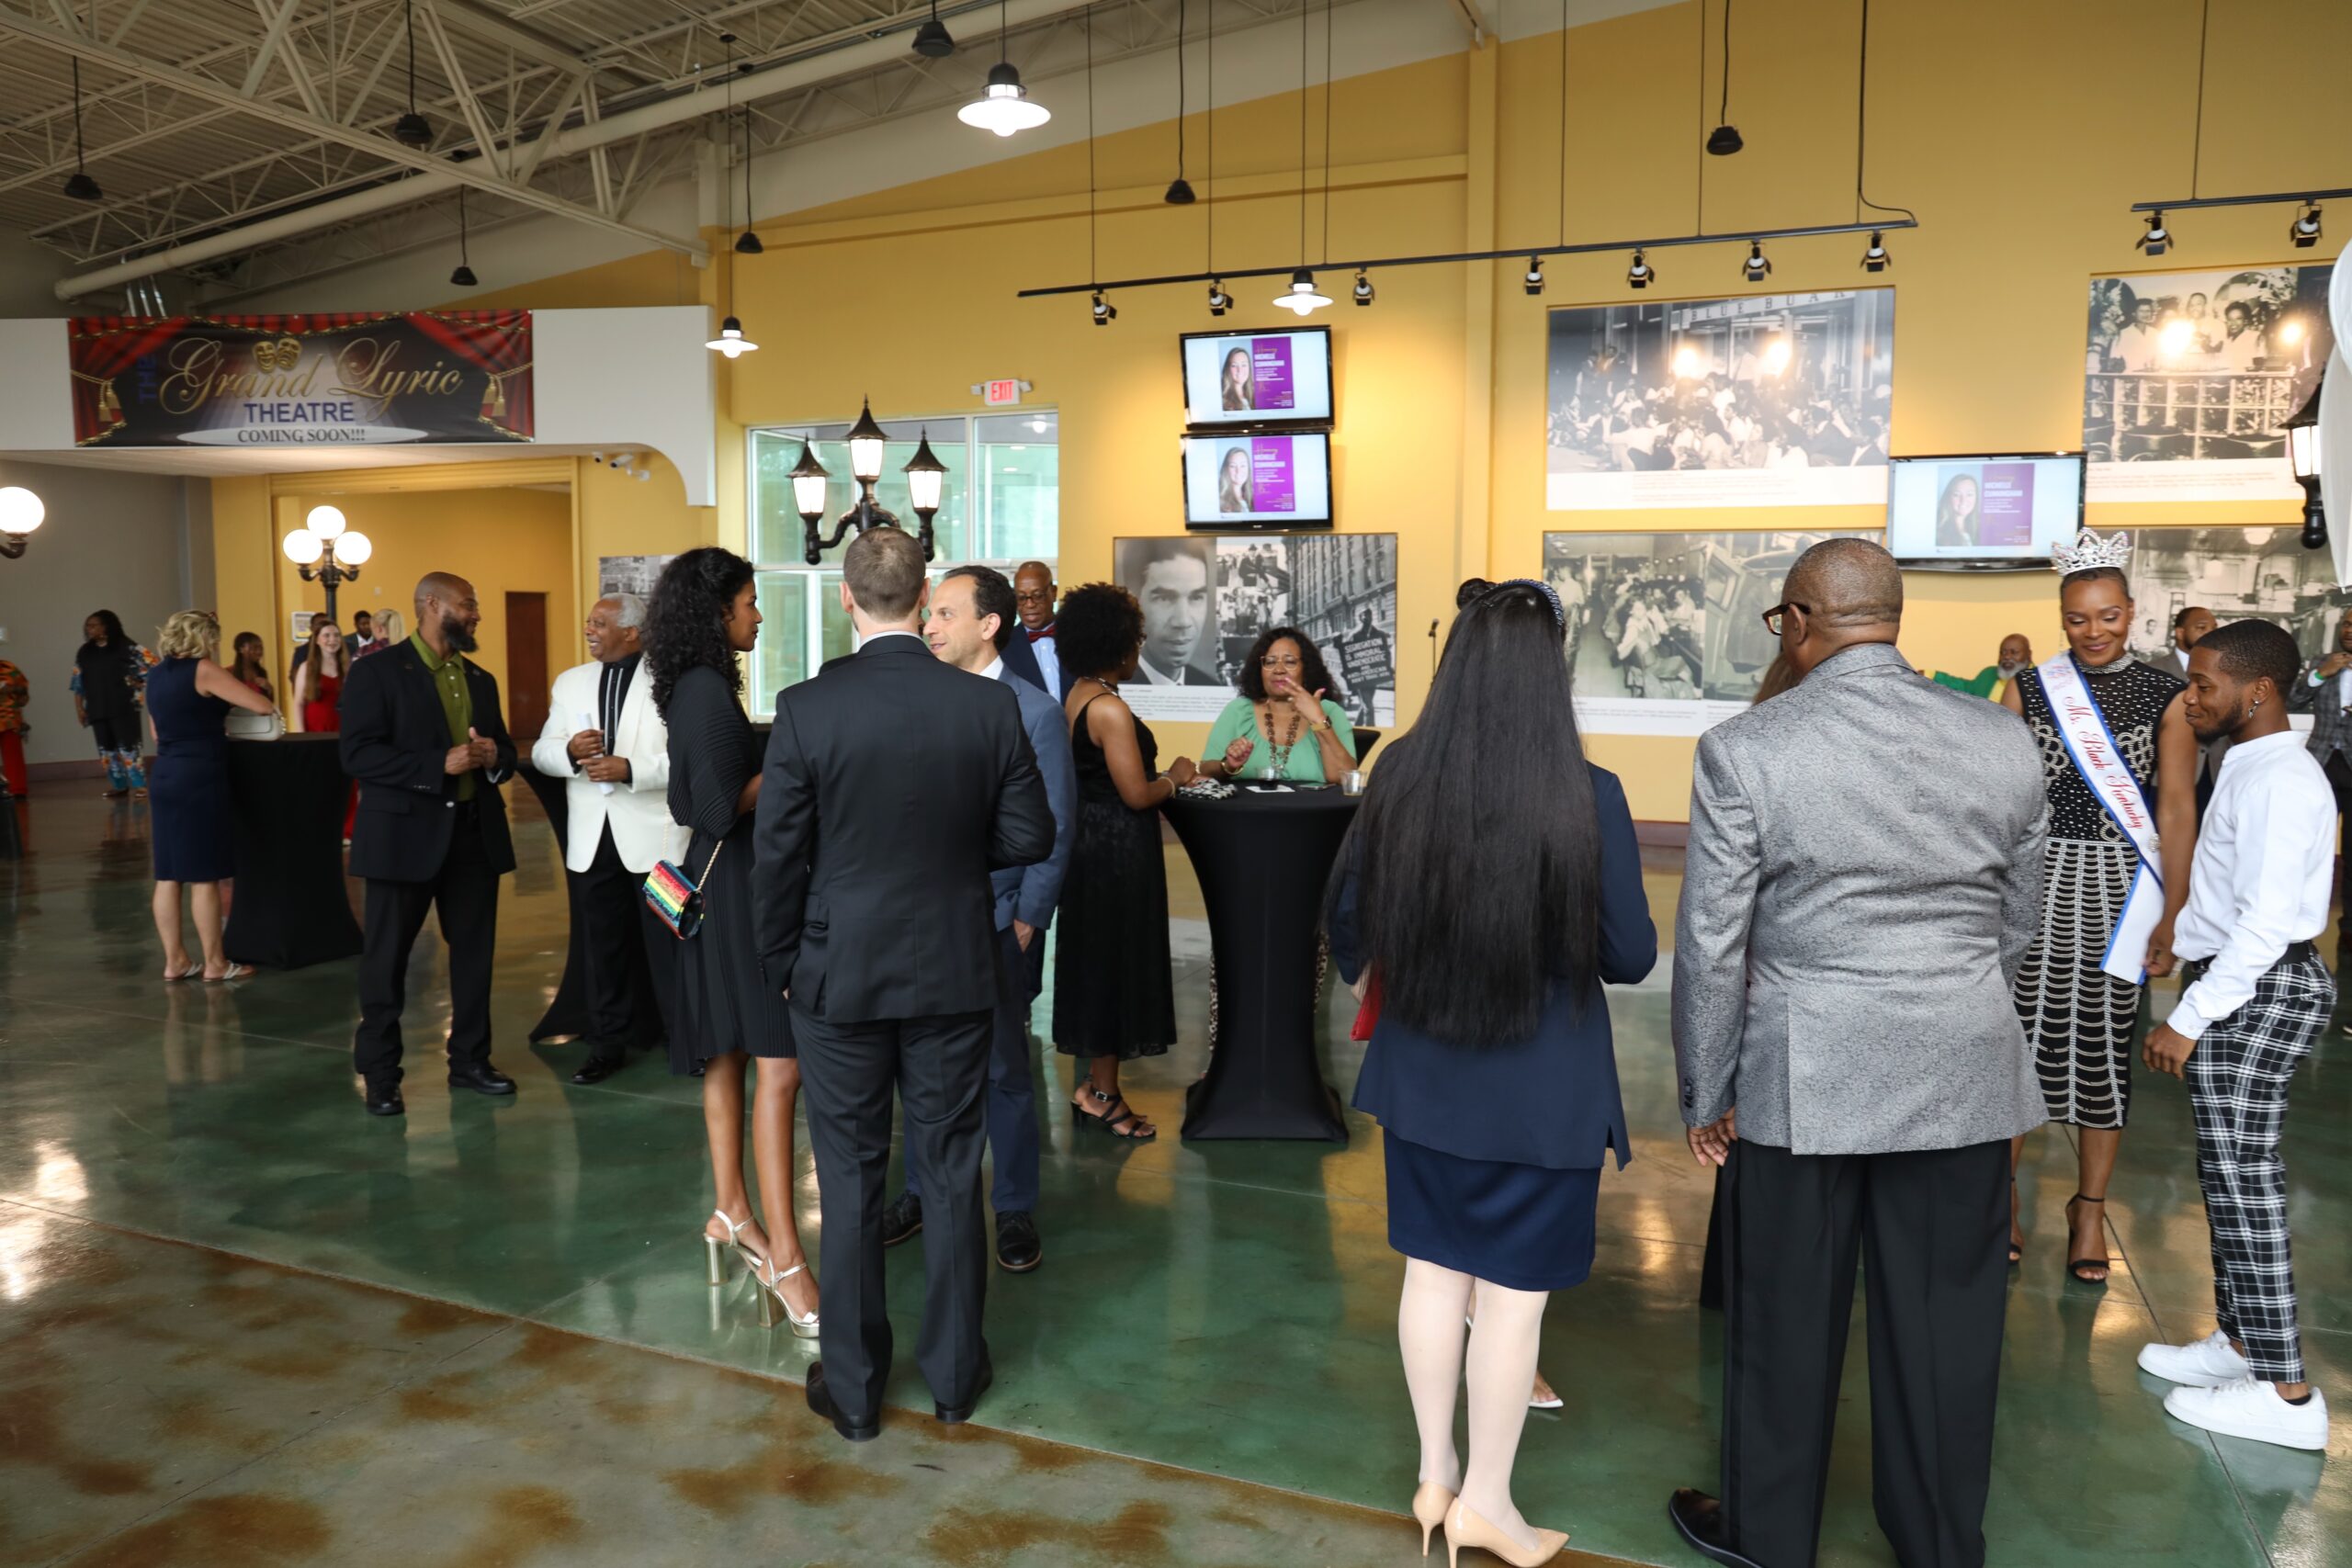 Louisville Central Community Centers, Inc. celebrates leaders in diversity, equity, and inclusion on Juneteenth